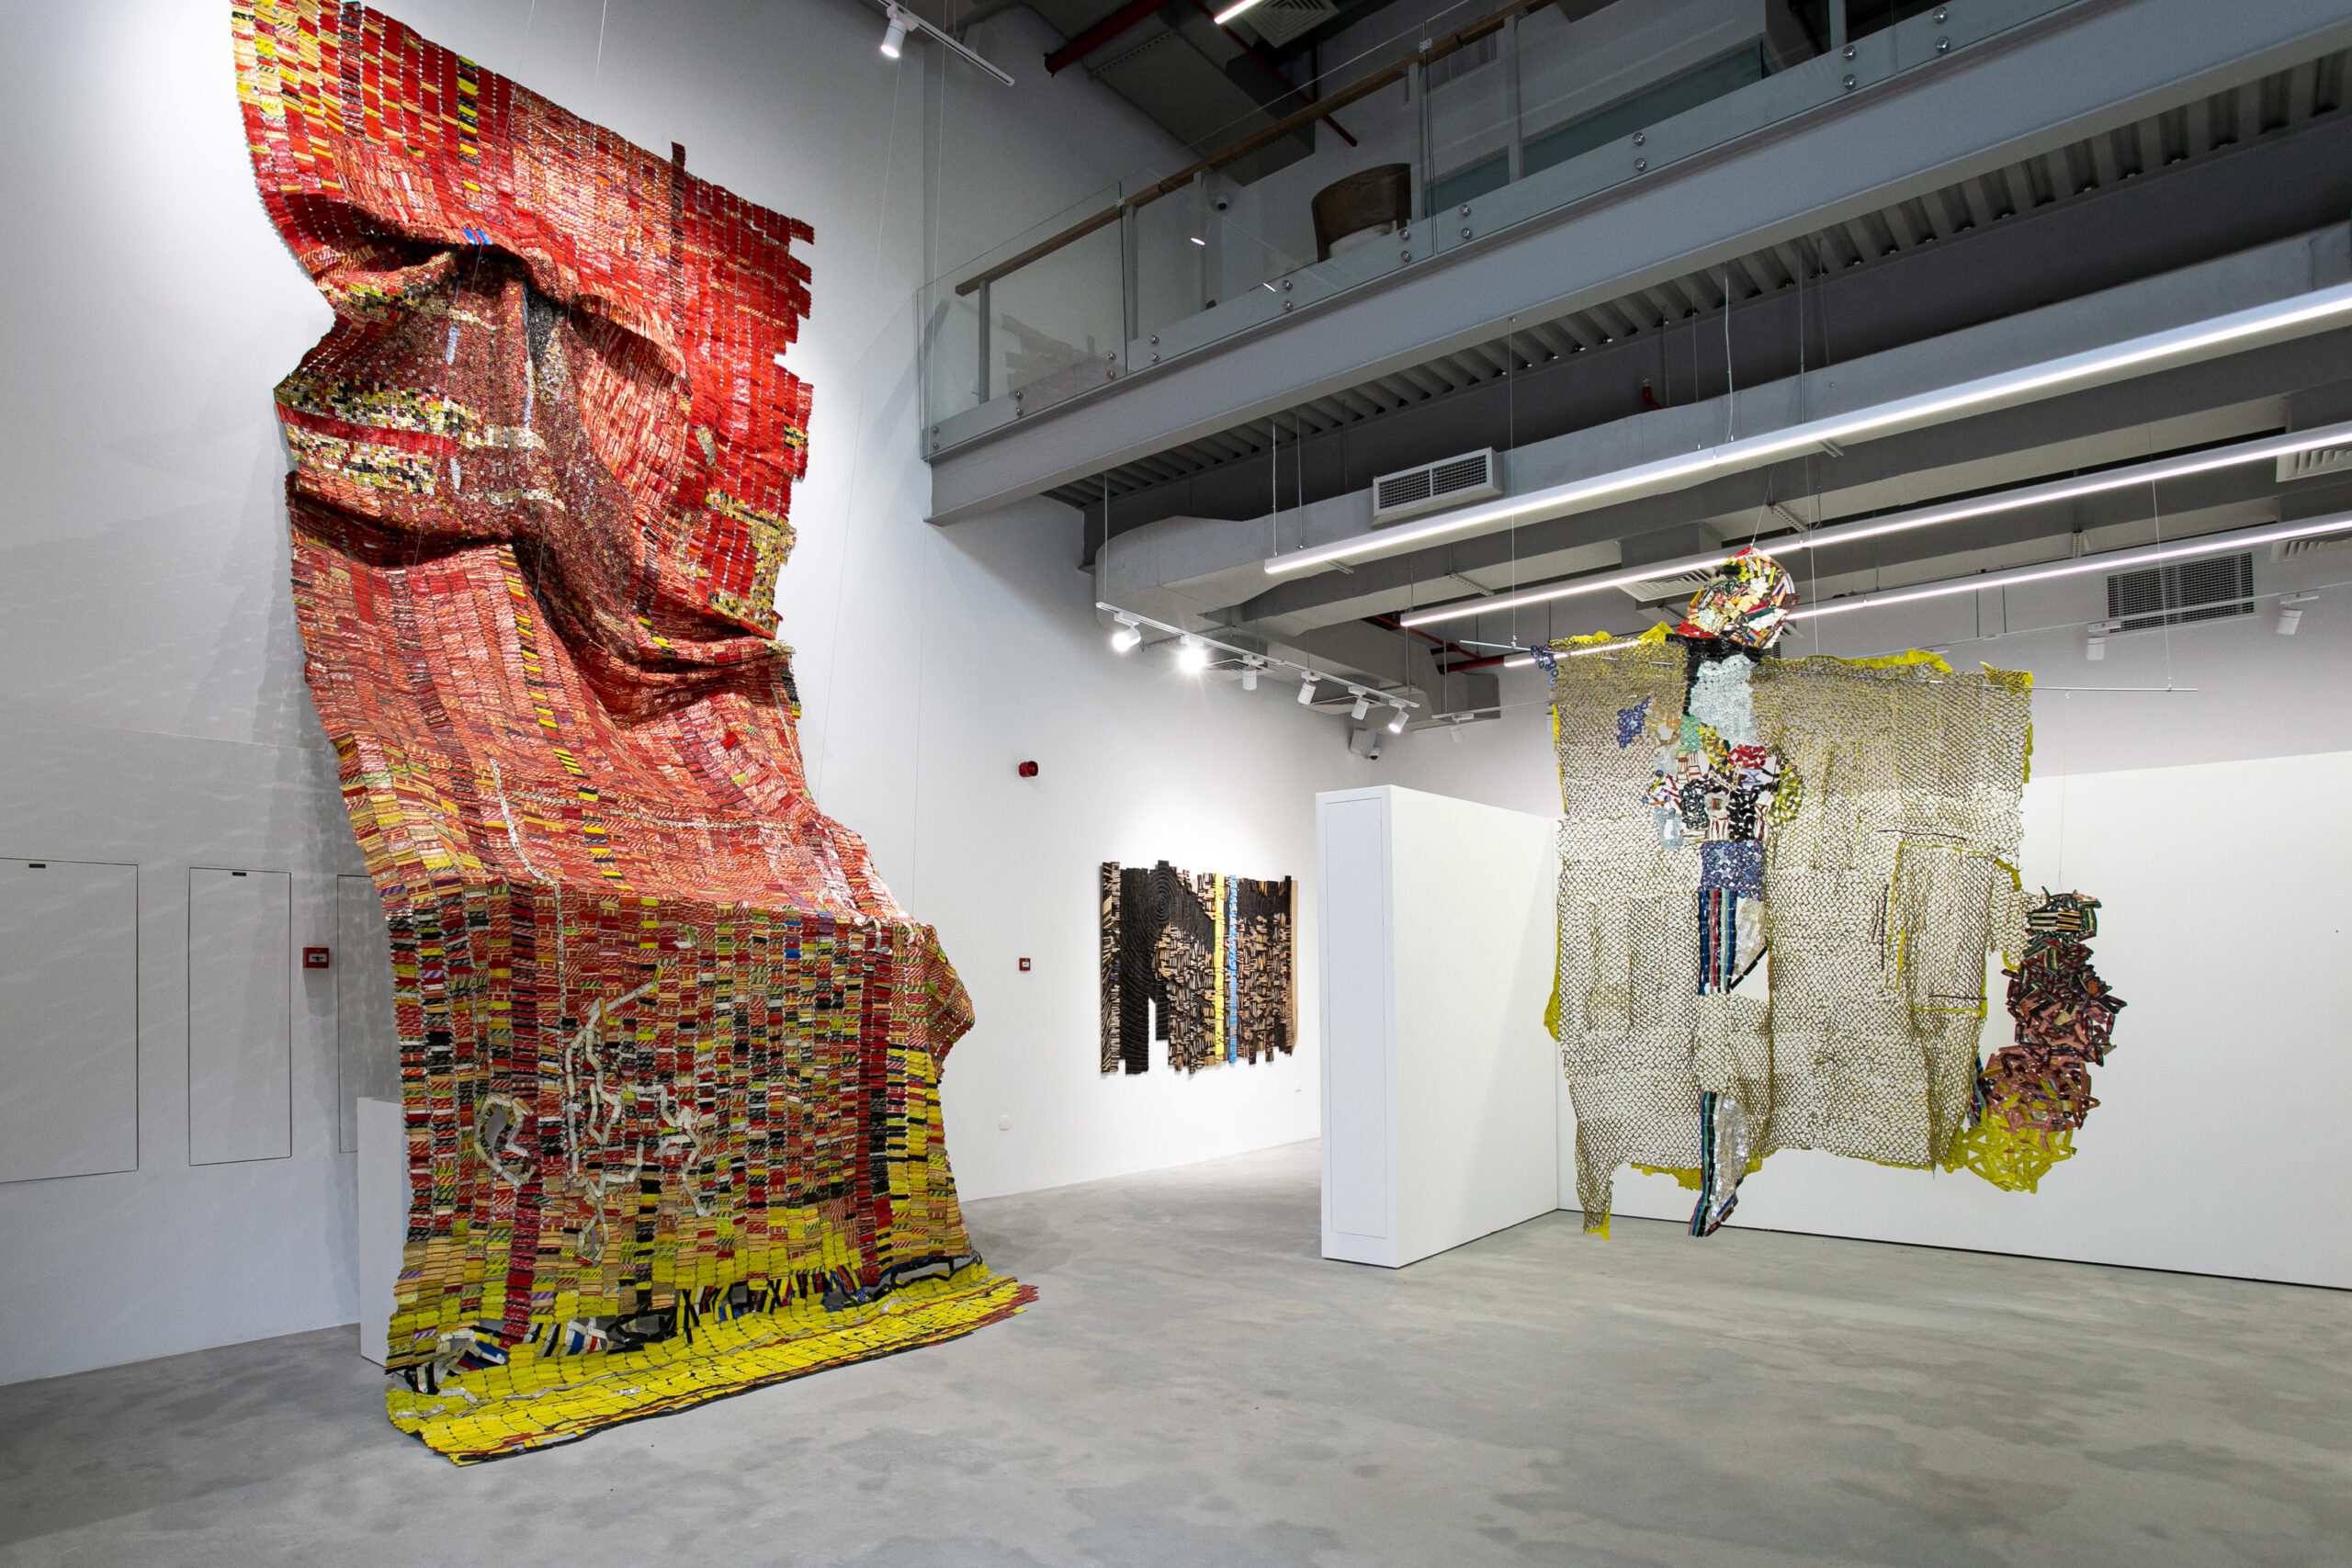 What Are the Stakes of Representing Art from Africa in Dubai?